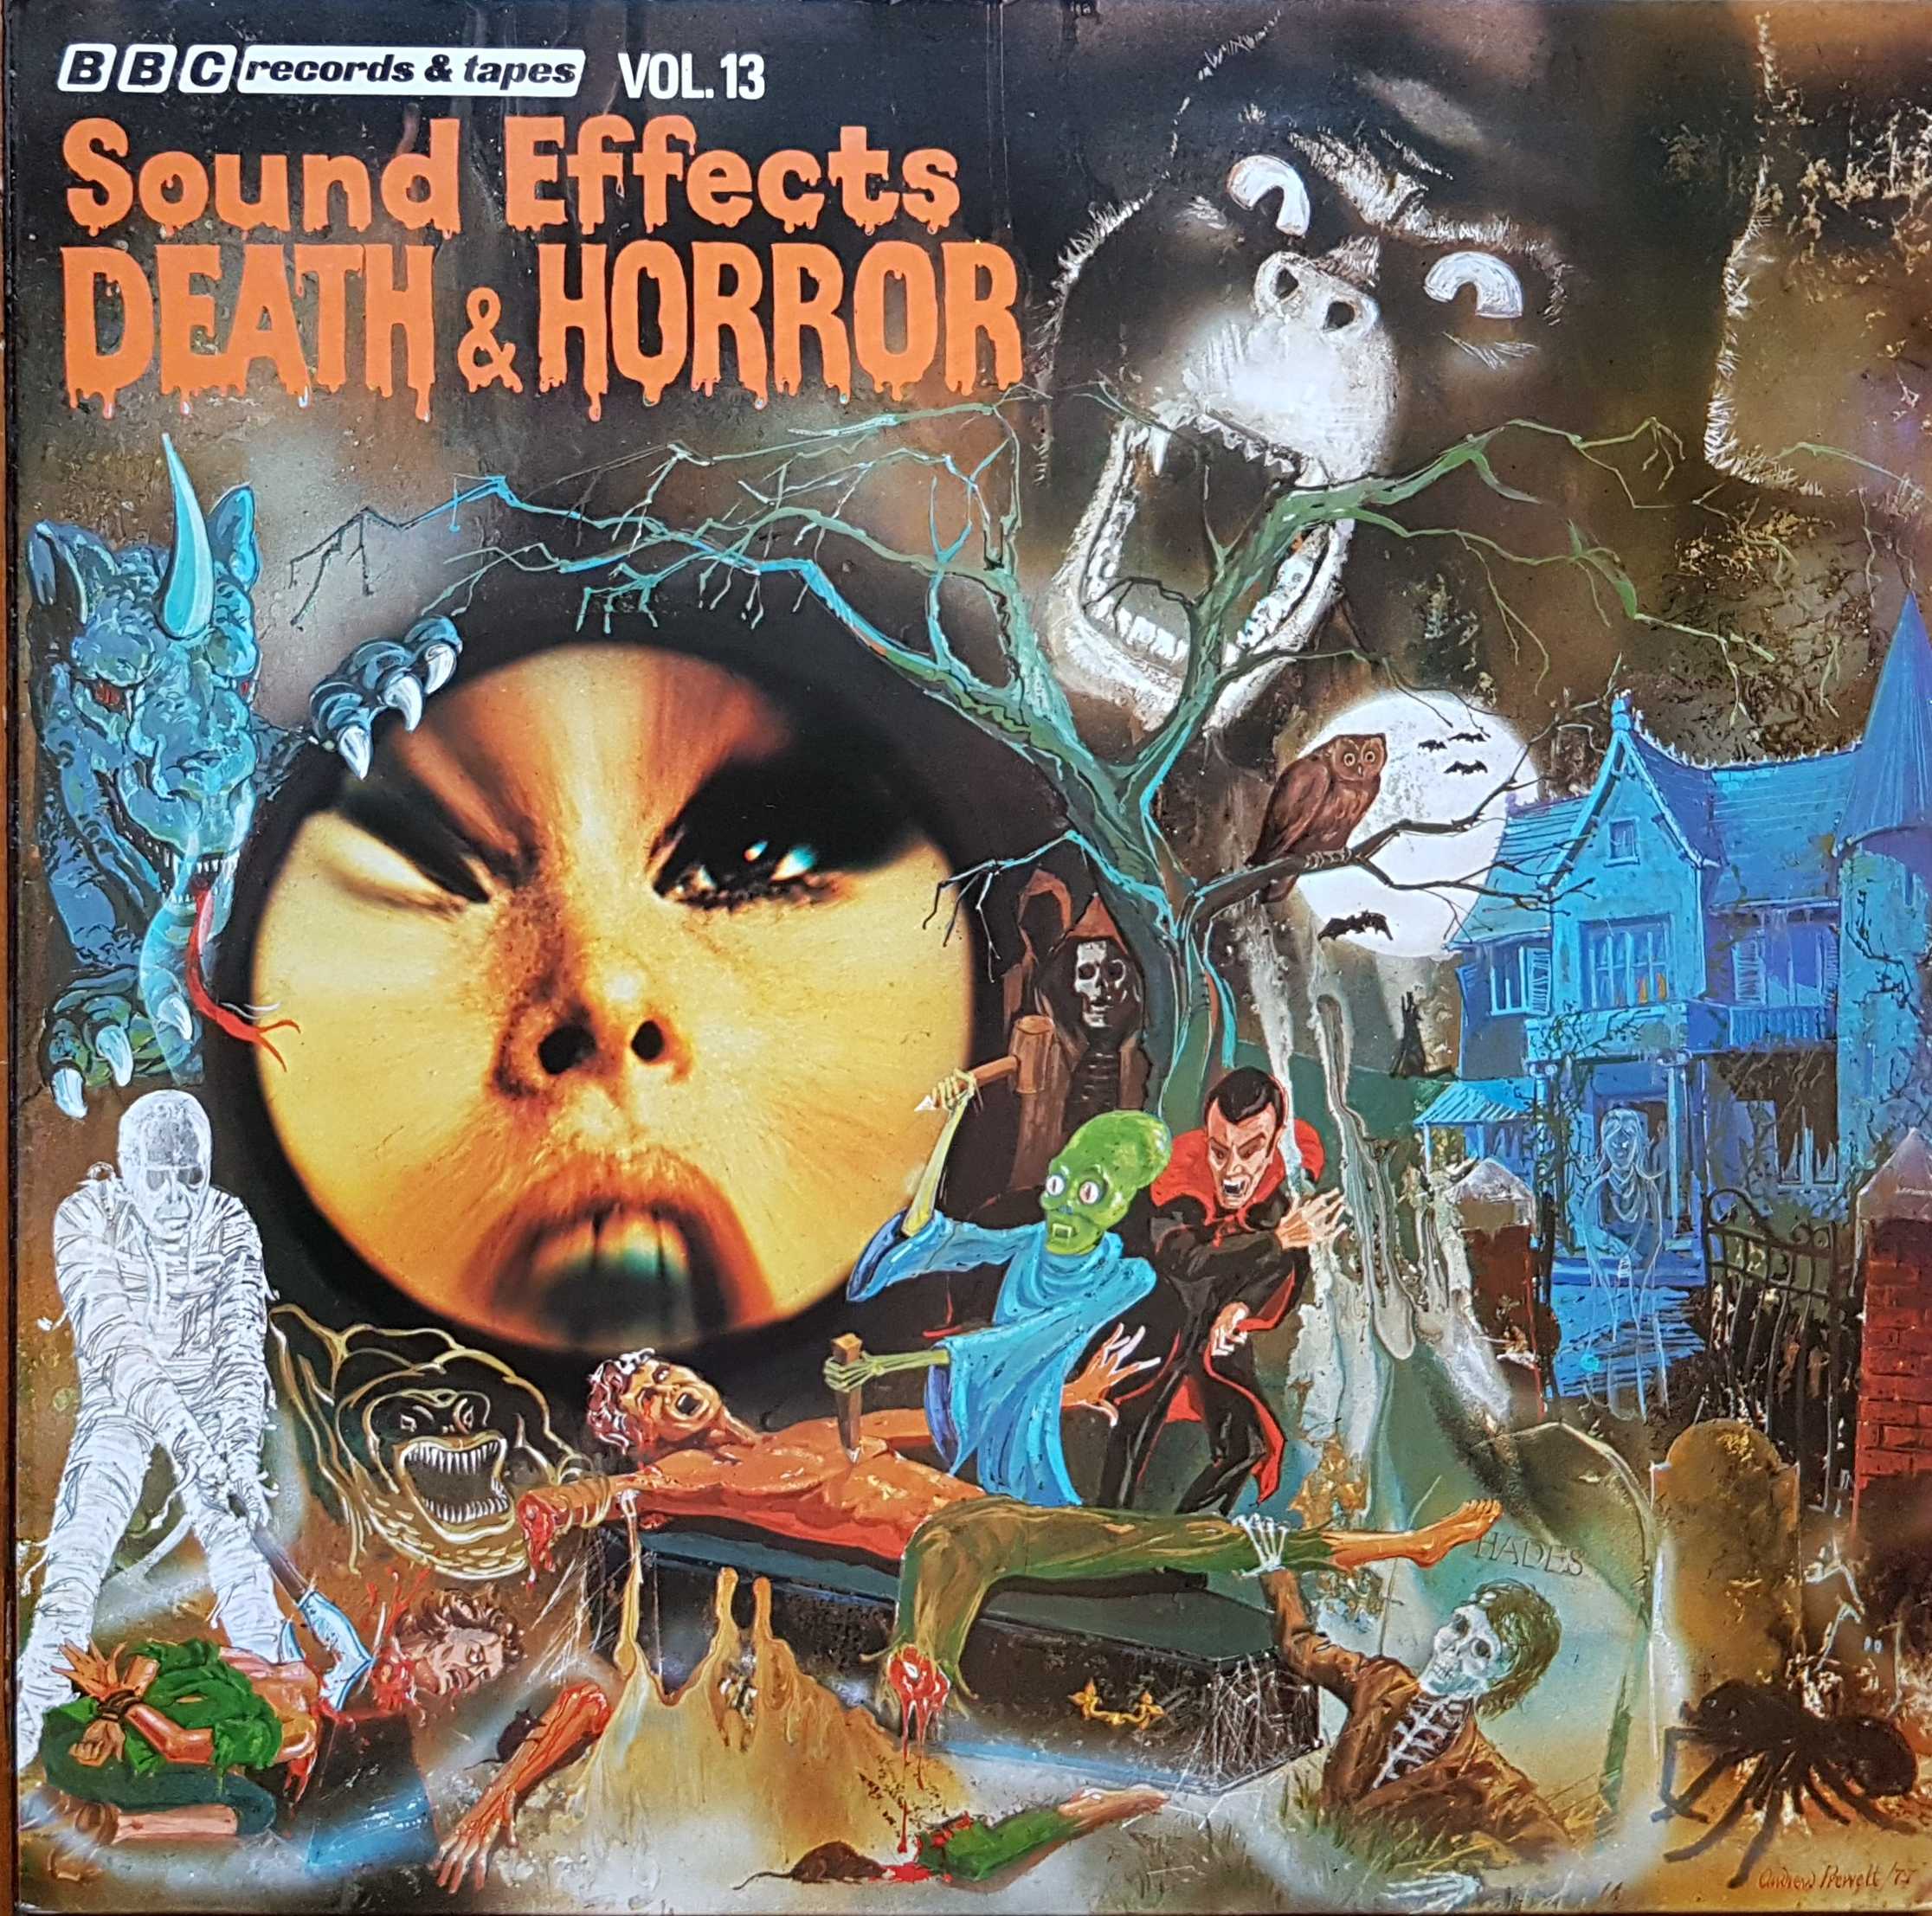 Picture of REC 269 Death and horror by artist Mike Harding from the BBC albums - Records and Tapes library